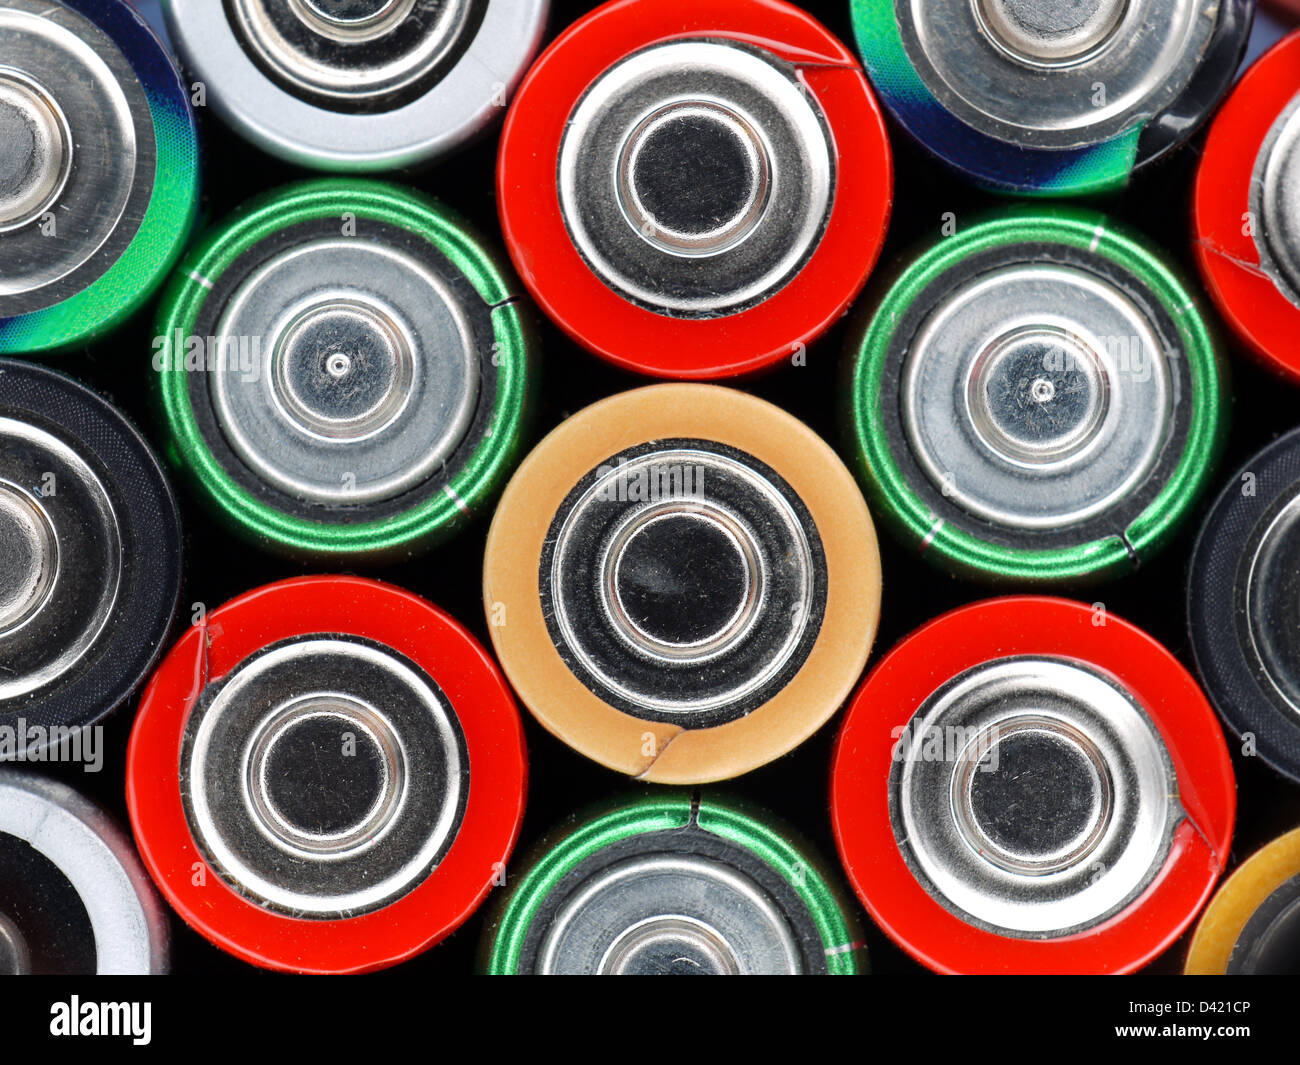 Closeup of pile of used alkaline batteries Stock Photo